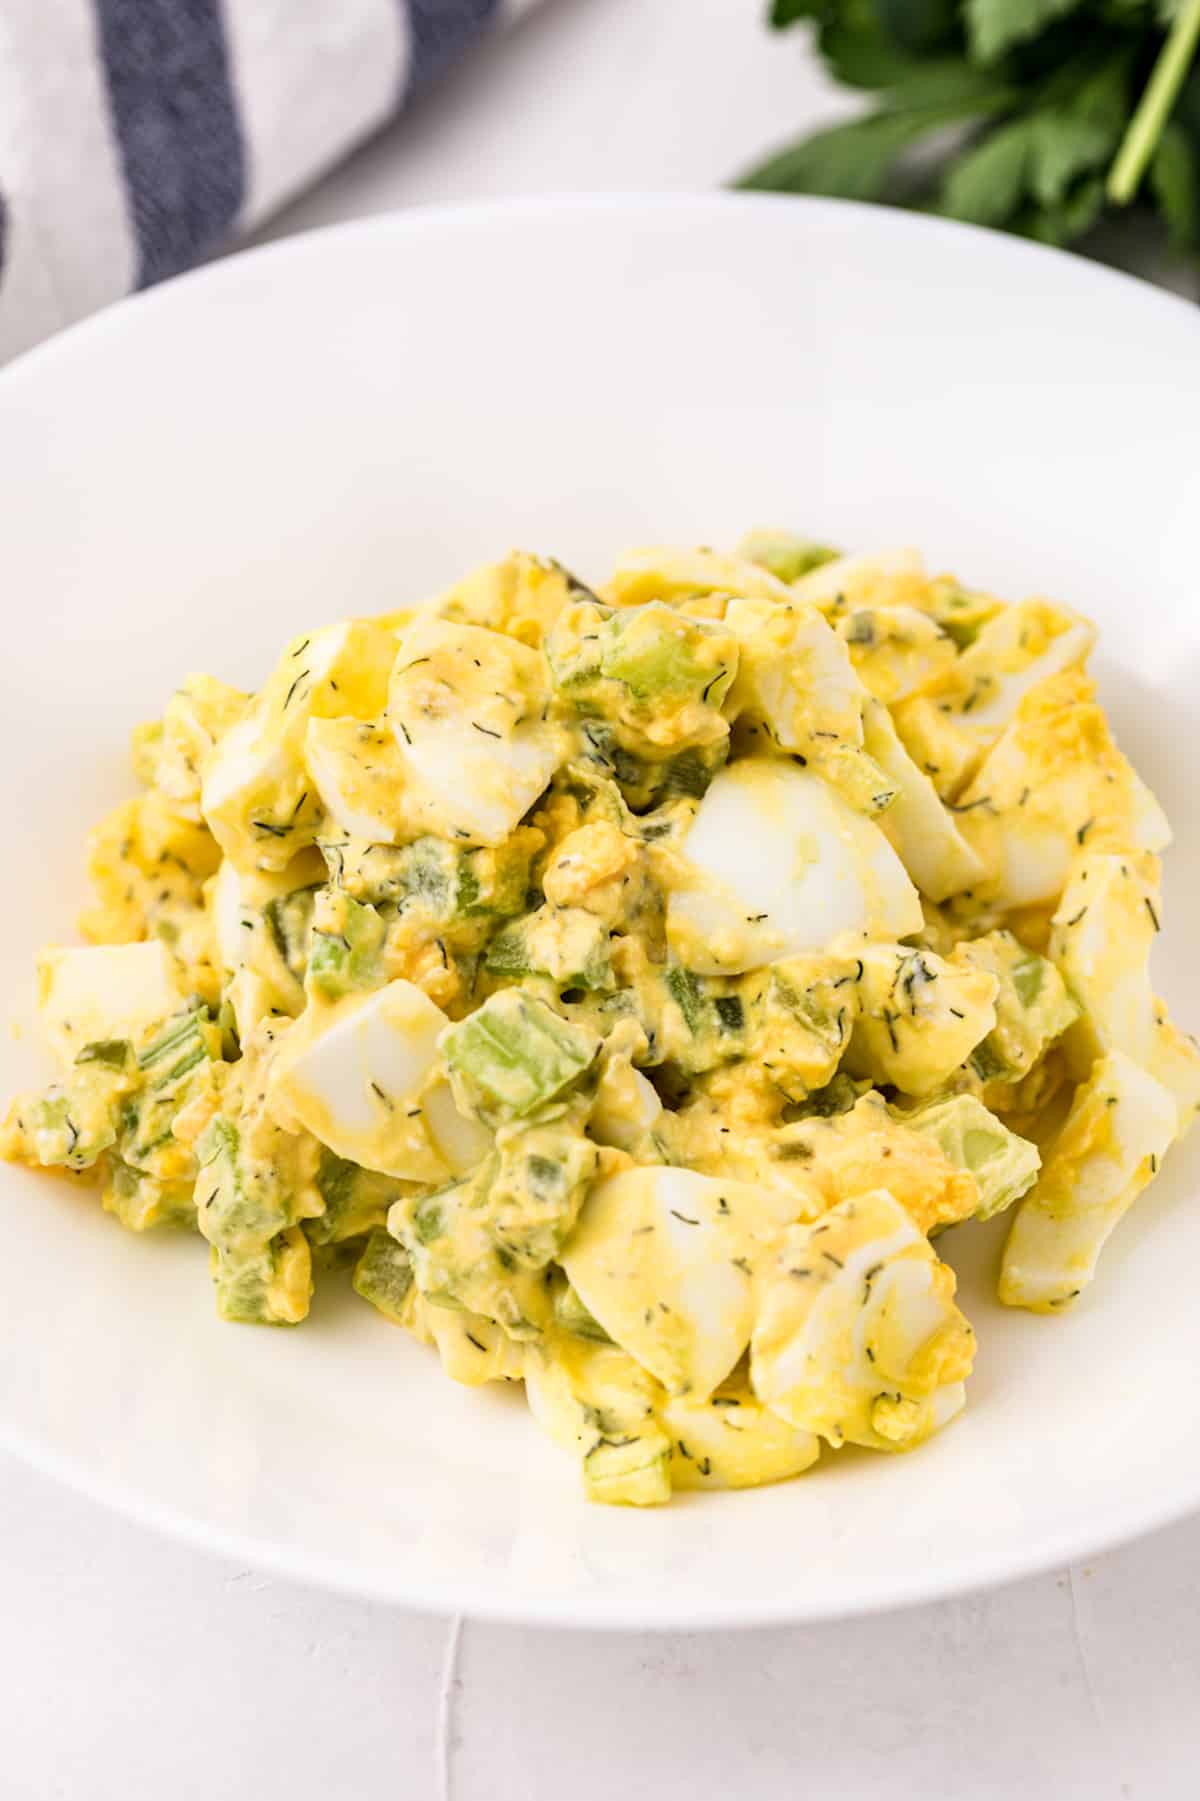 A plate of egg salad with celery.